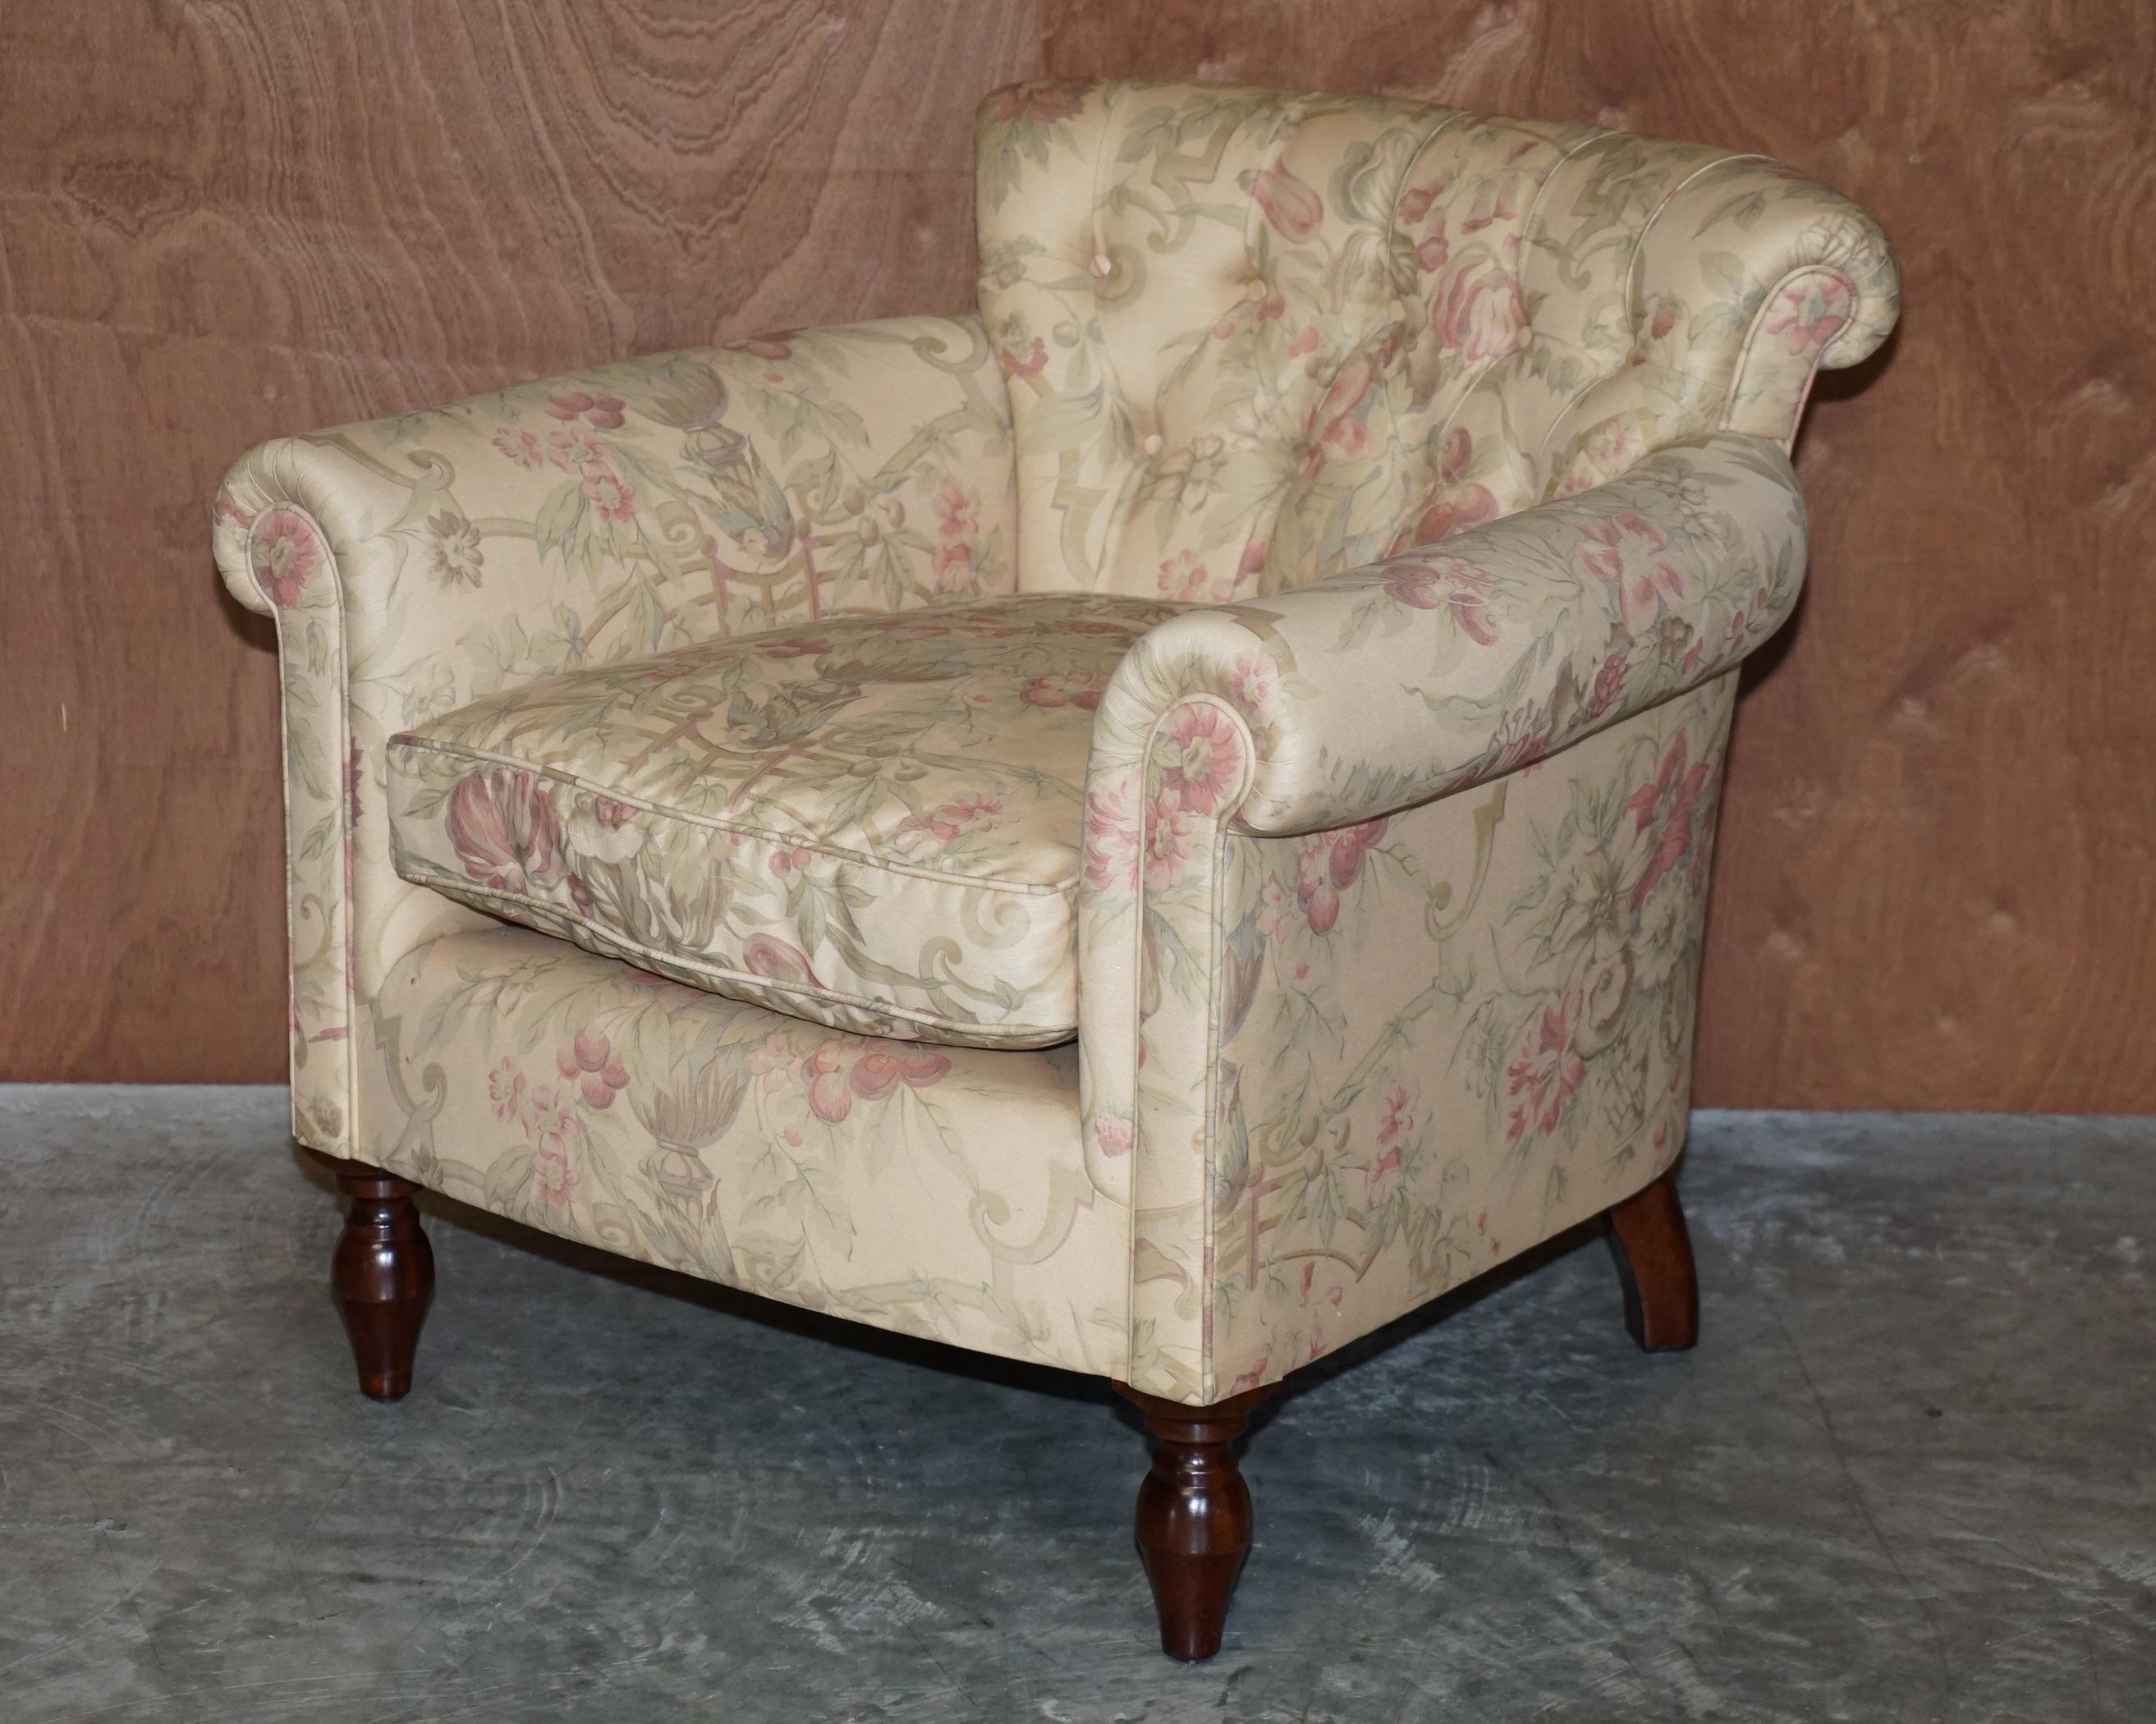 We are delighted to offer for sale this sublime pair of original George Smith Chelsea Chesterfield tufted armchairs 

These armchairs were bought and used for pretty display use only, they may have the odd tiny little mark here or there from